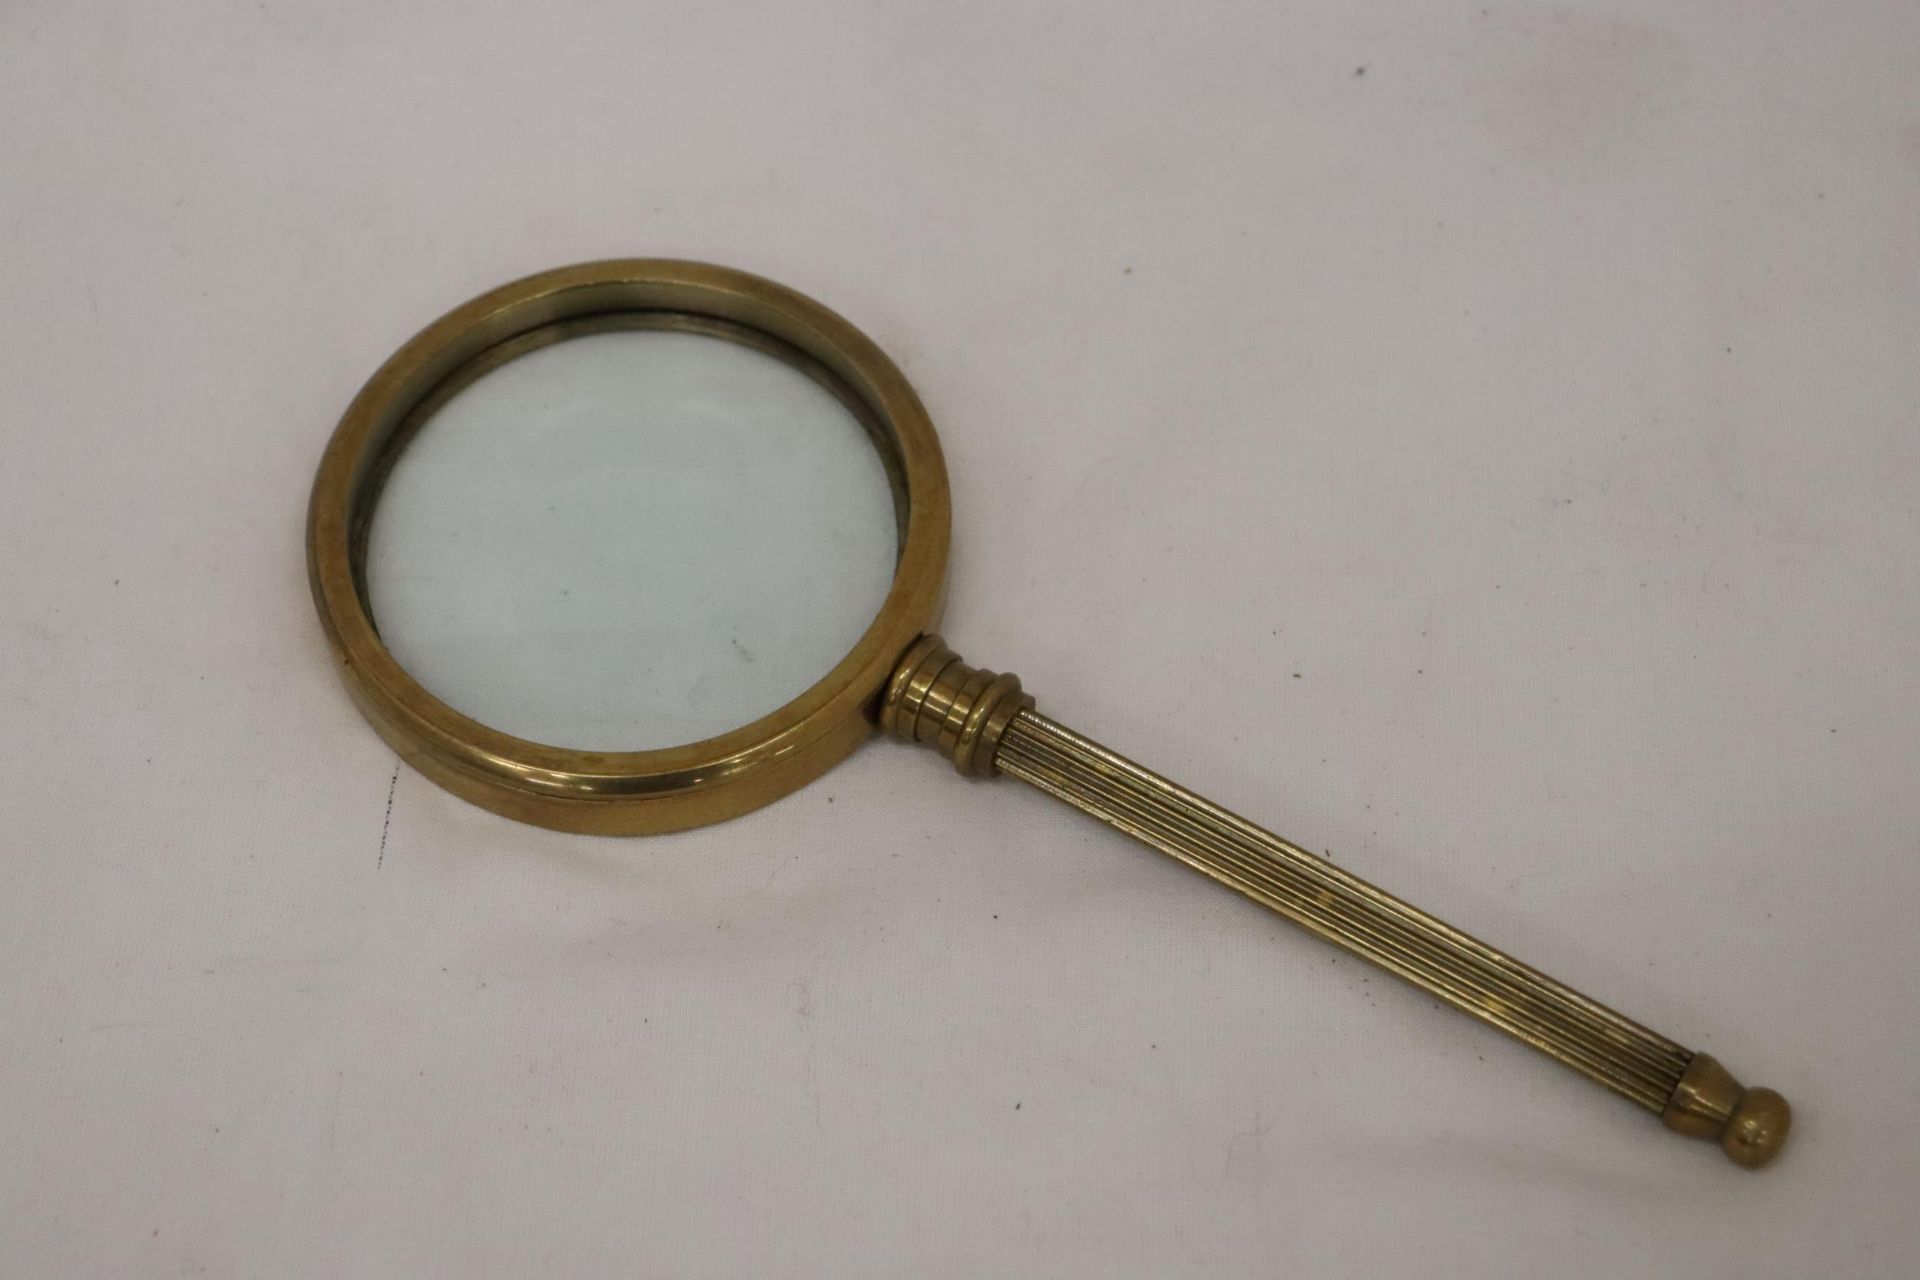 A HANDMADE VINTAGE ANTIQUE HENRY HUGHES & SONS OF LONDON 1941 BRASS MAGNIFYING GLASS - Image 5 of 5